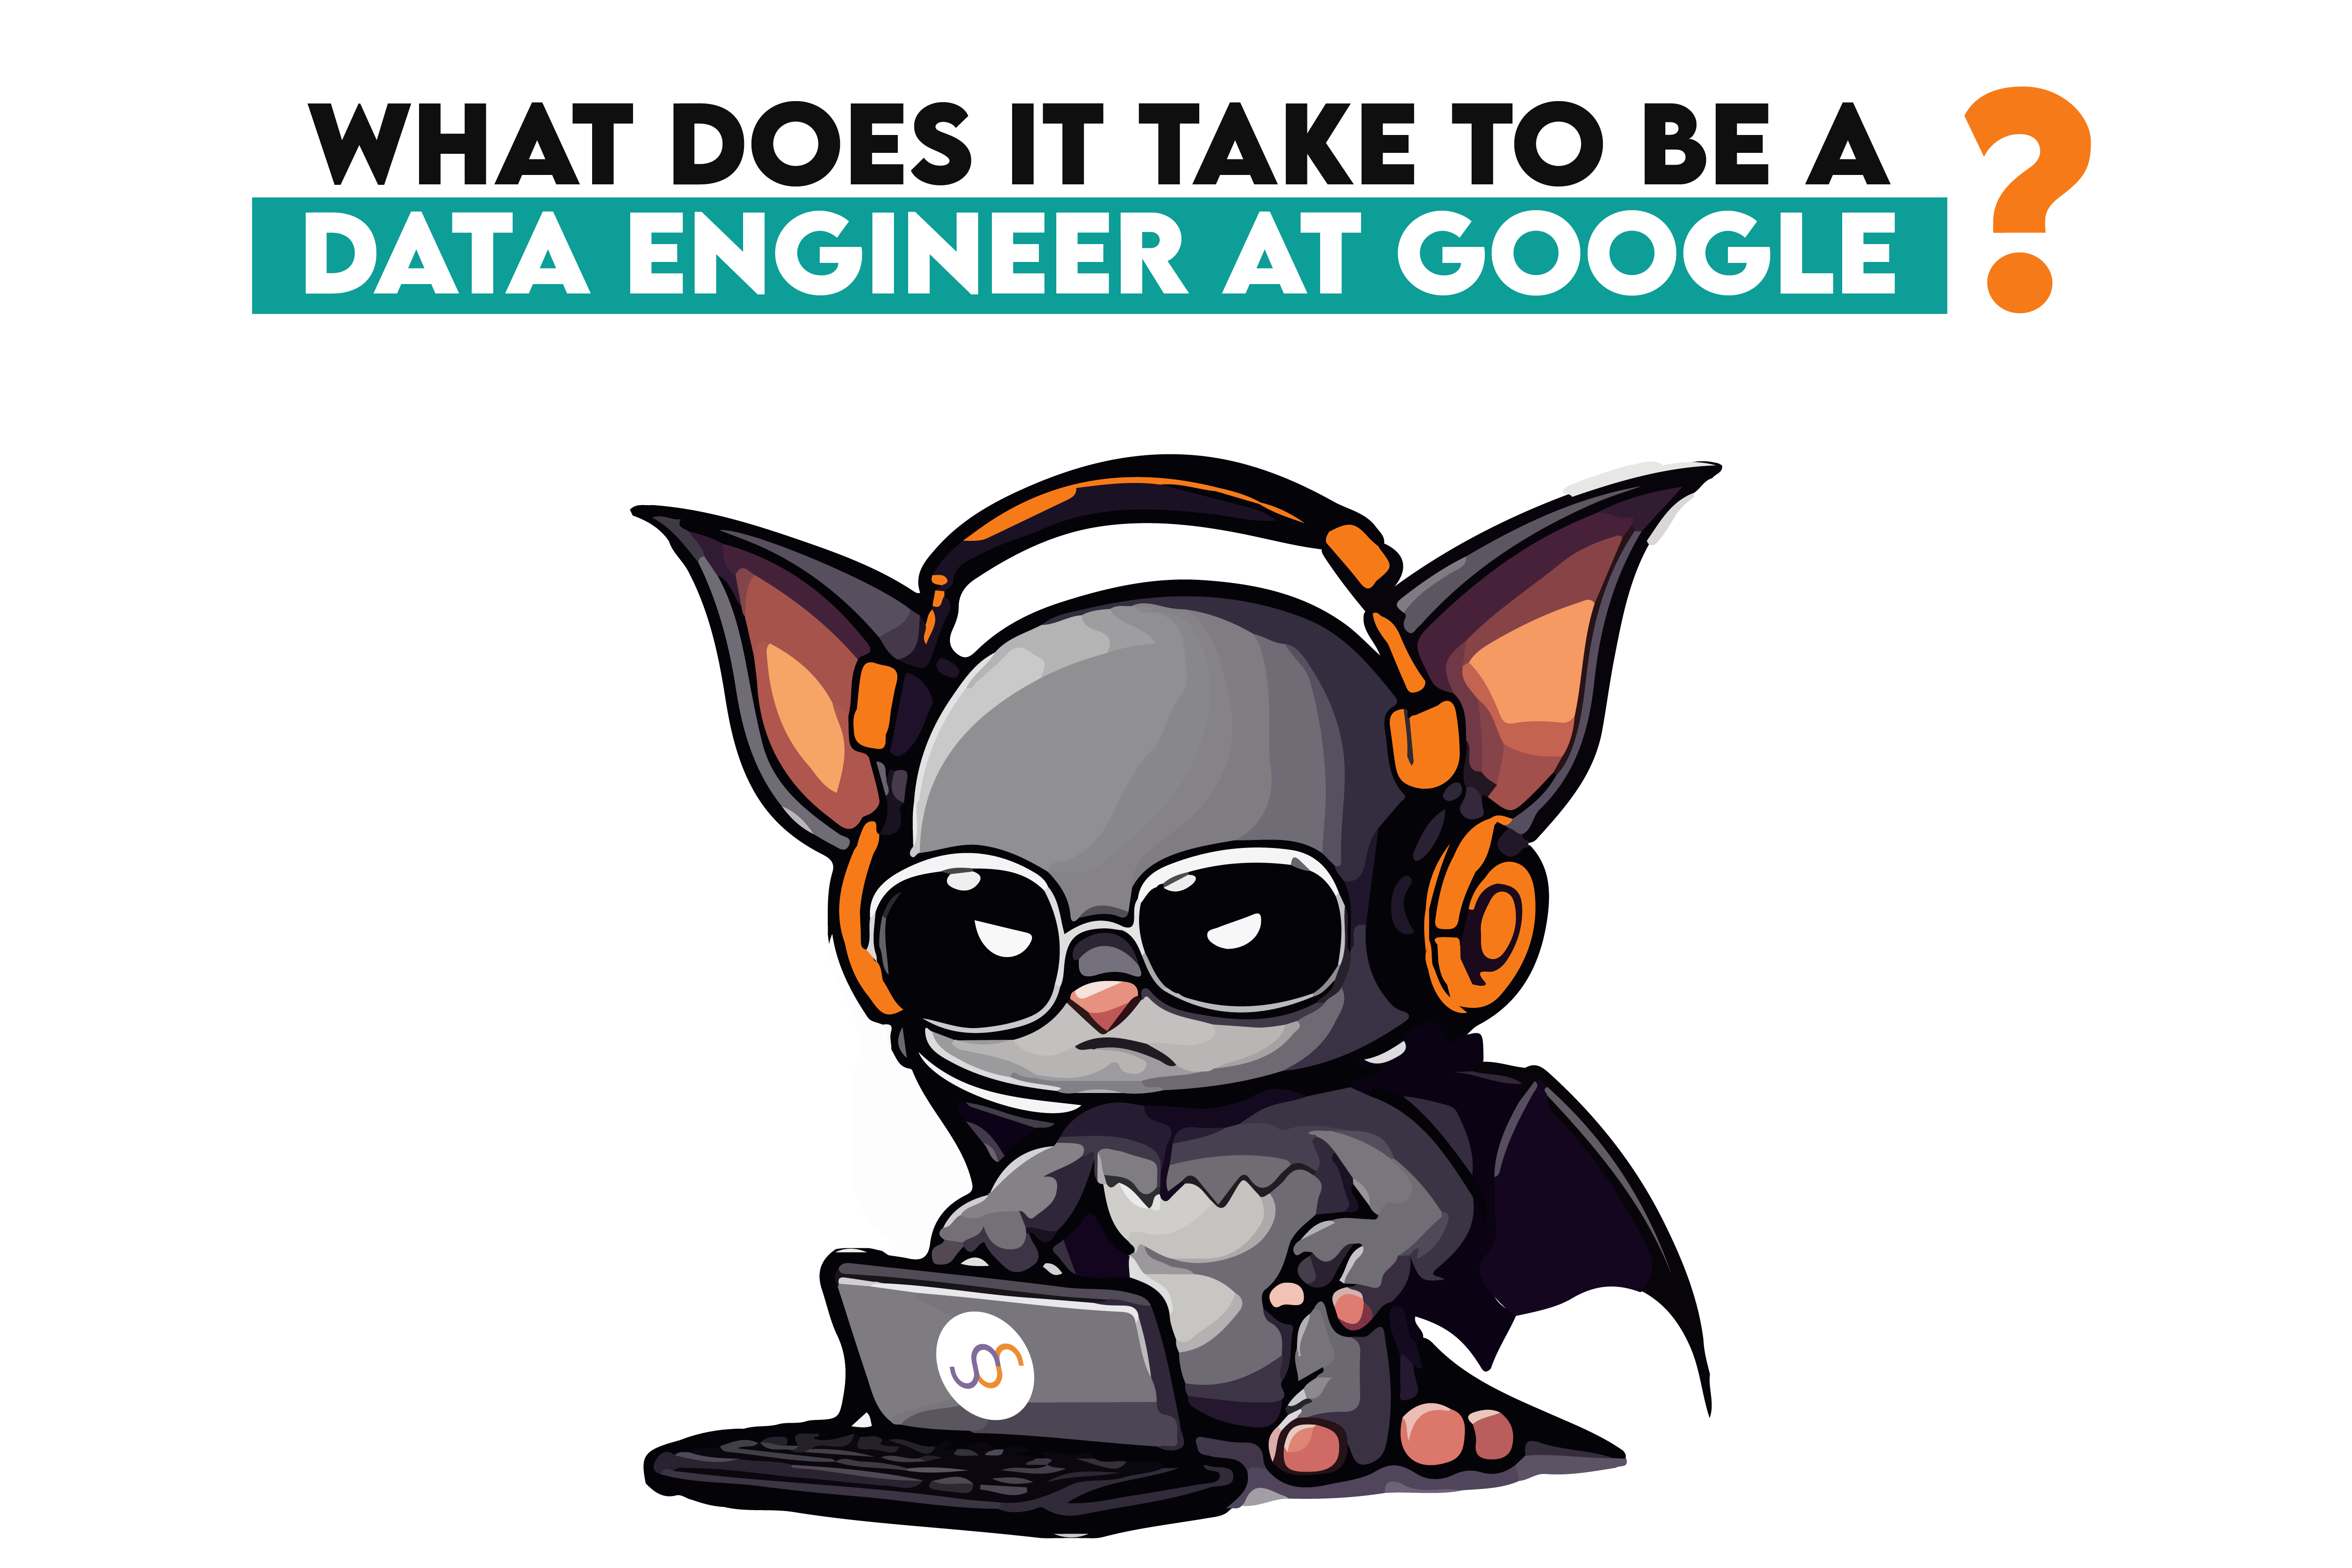 What Does It Take to Be a Data Engineer at Google